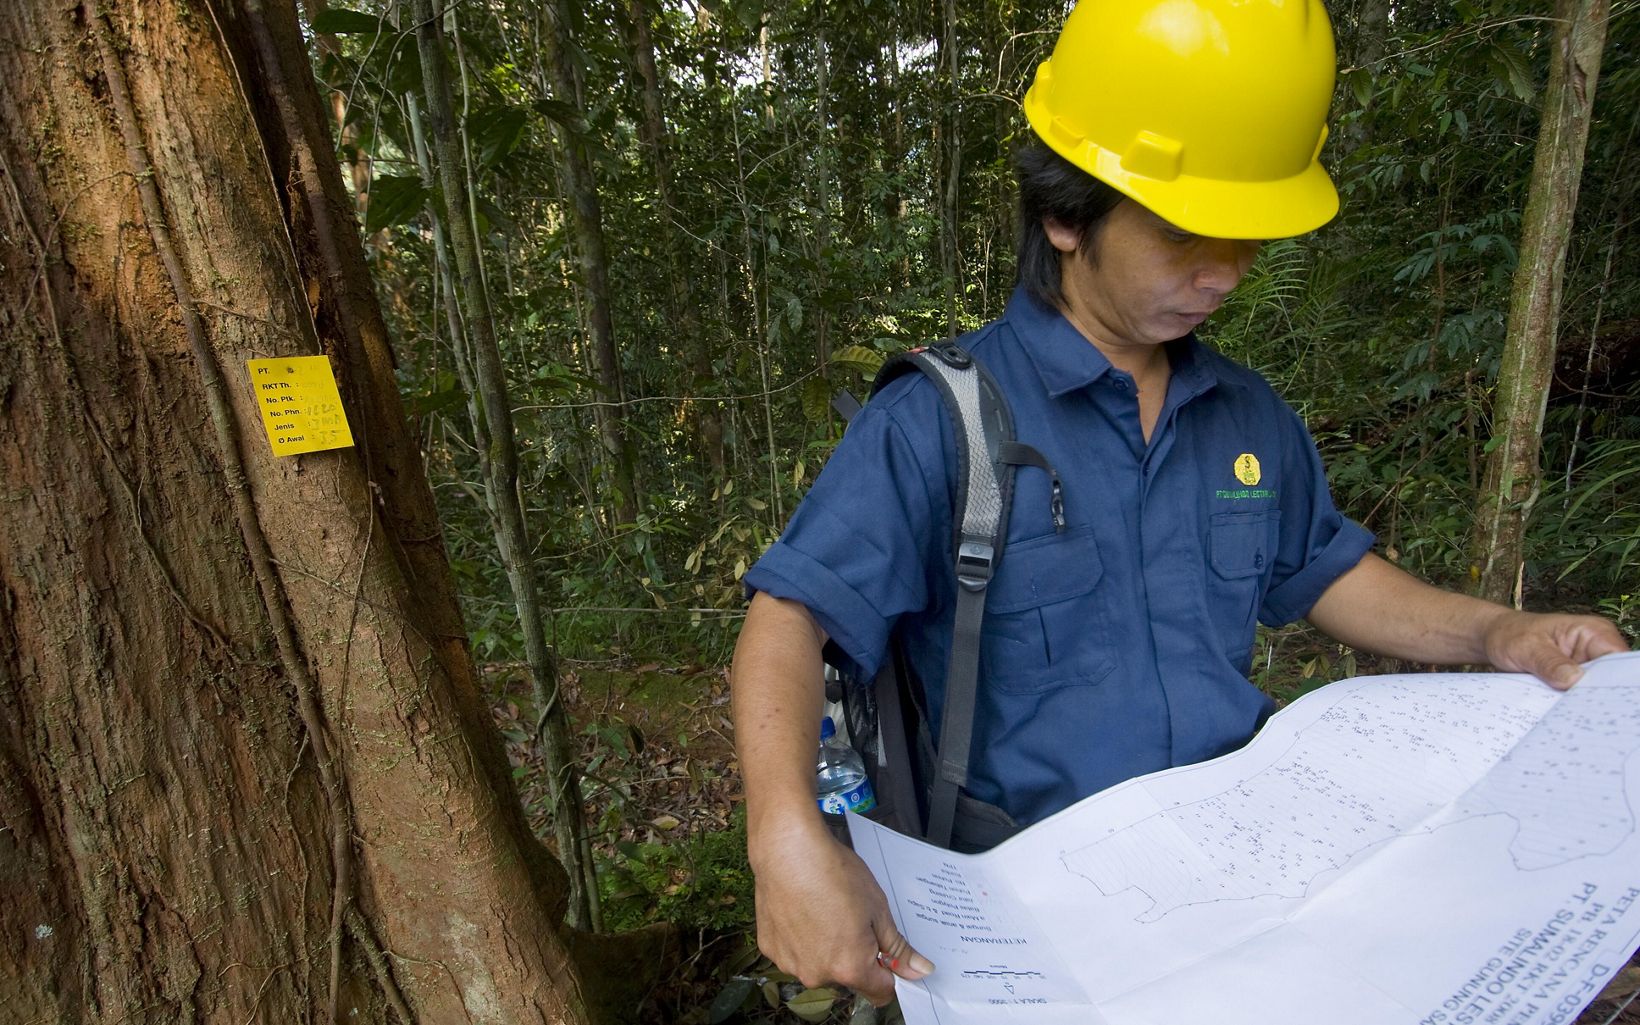 Logging Planner Suryadi Mentemas studies a map as he tags trees at the number four concession logging area in the Kalimantan, Indonesia. © Bridget Besaw